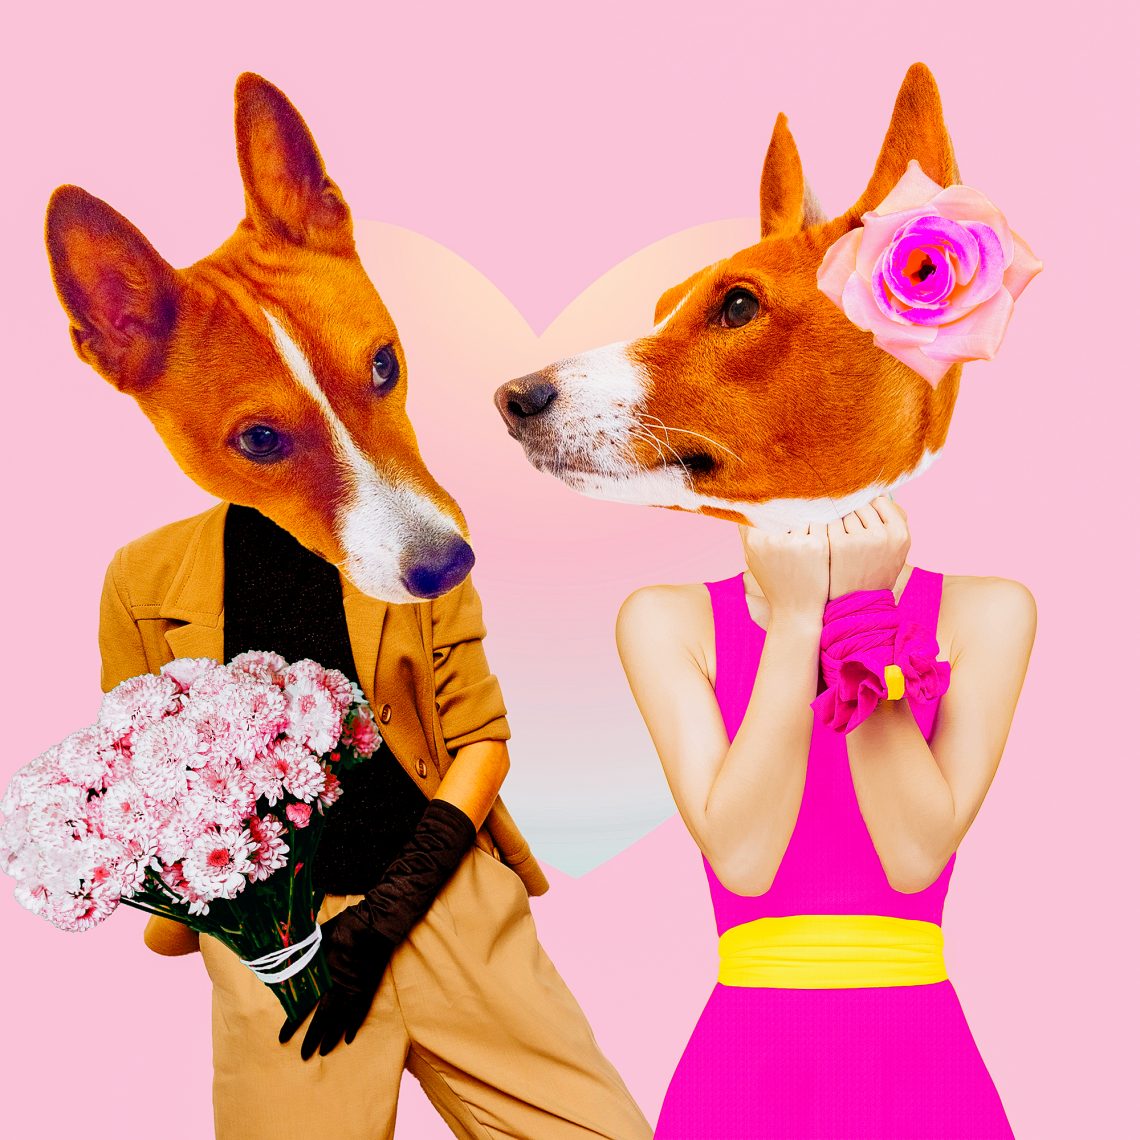 Minimal Contemporary collage art. Dogs in love. Date. St. Valent